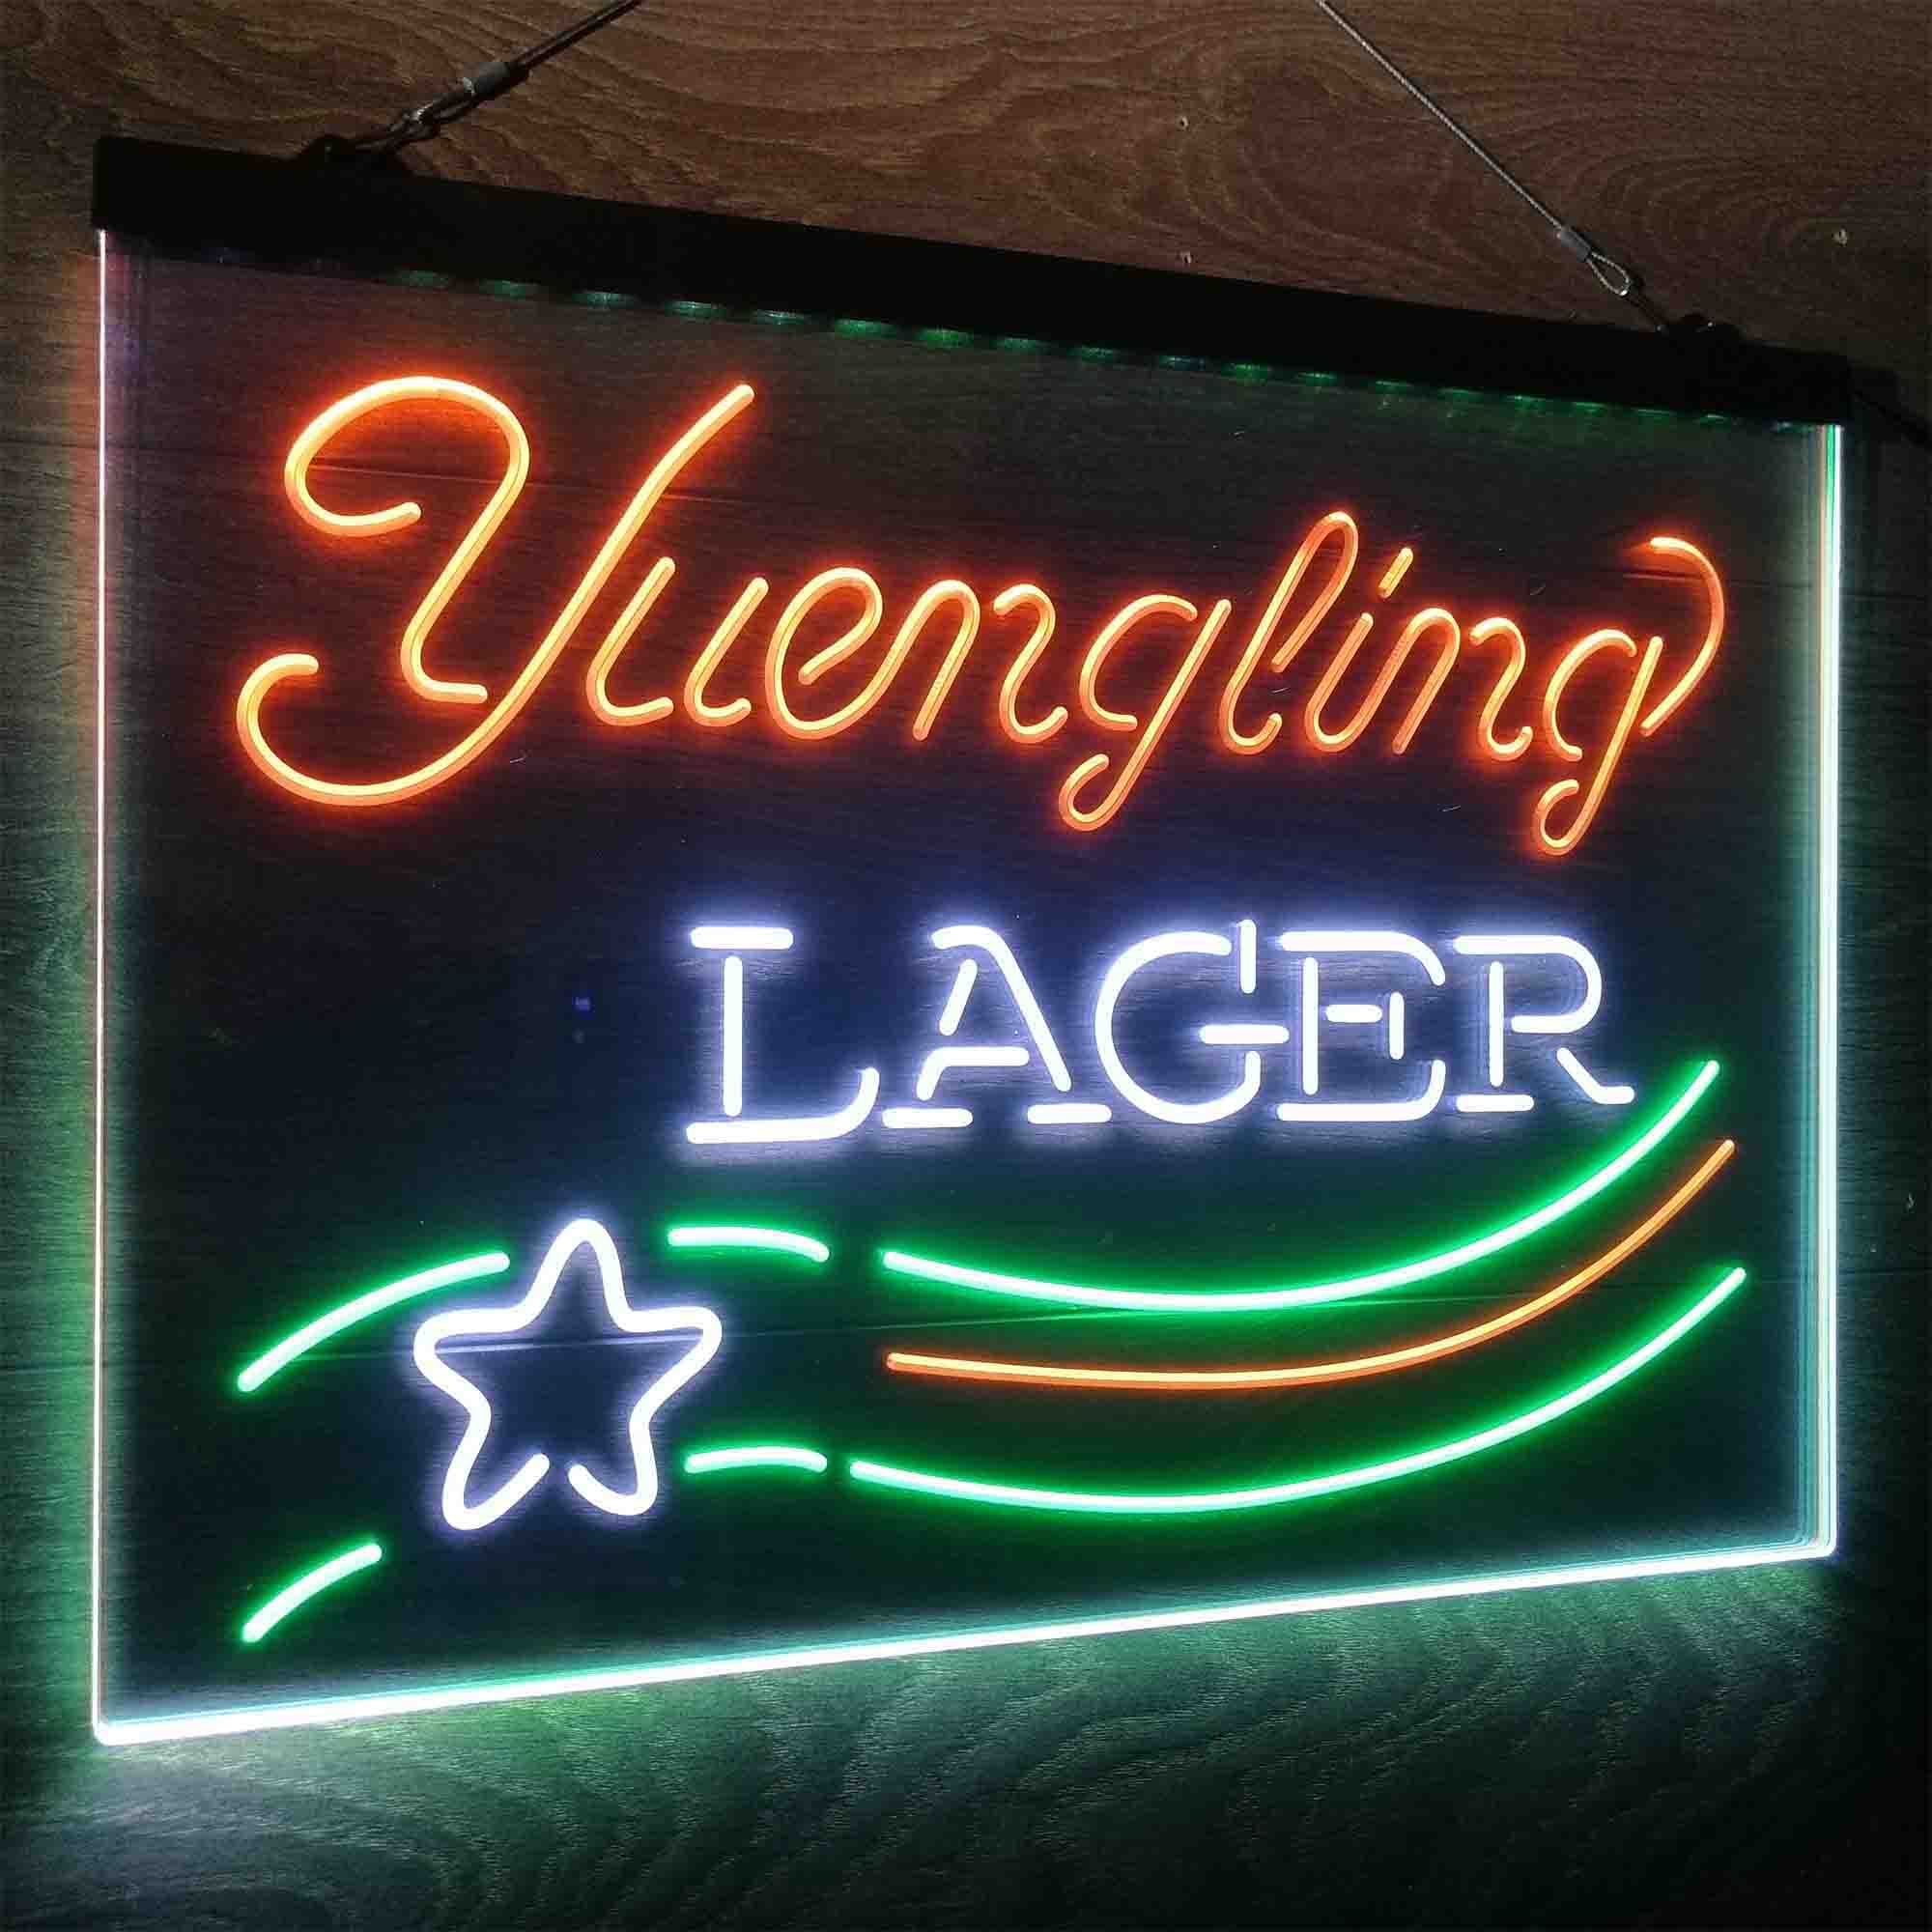 Yuengling Beer Larger Bar Neon LED Sign 3 Colors